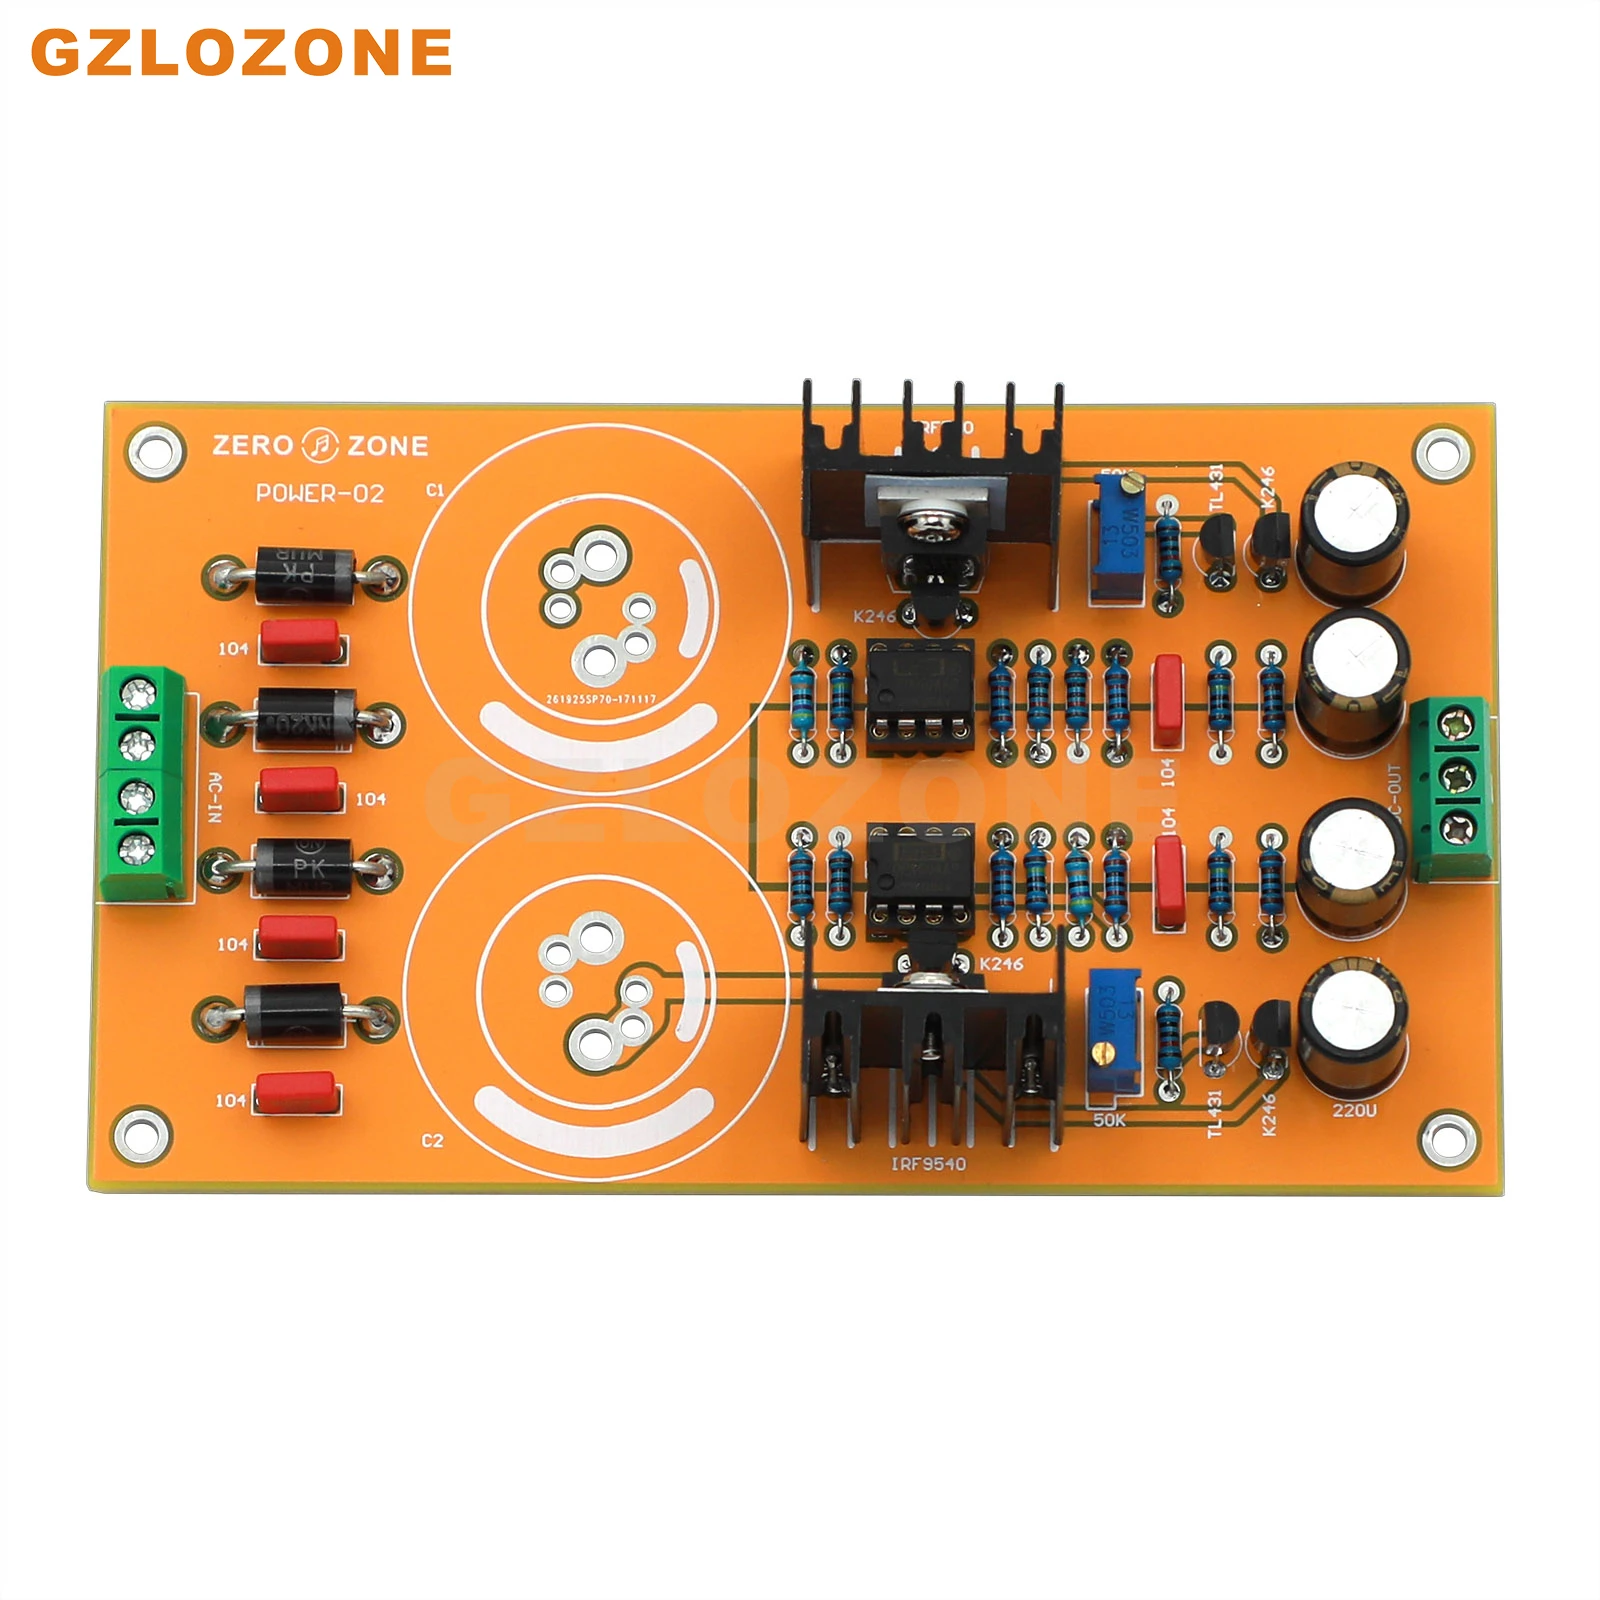 

ZEROZONE POWER-02 Adjustable Regulators Linear Power Supply DIY Kit/Finished Board For Preamplifier (No Main Capacitor)